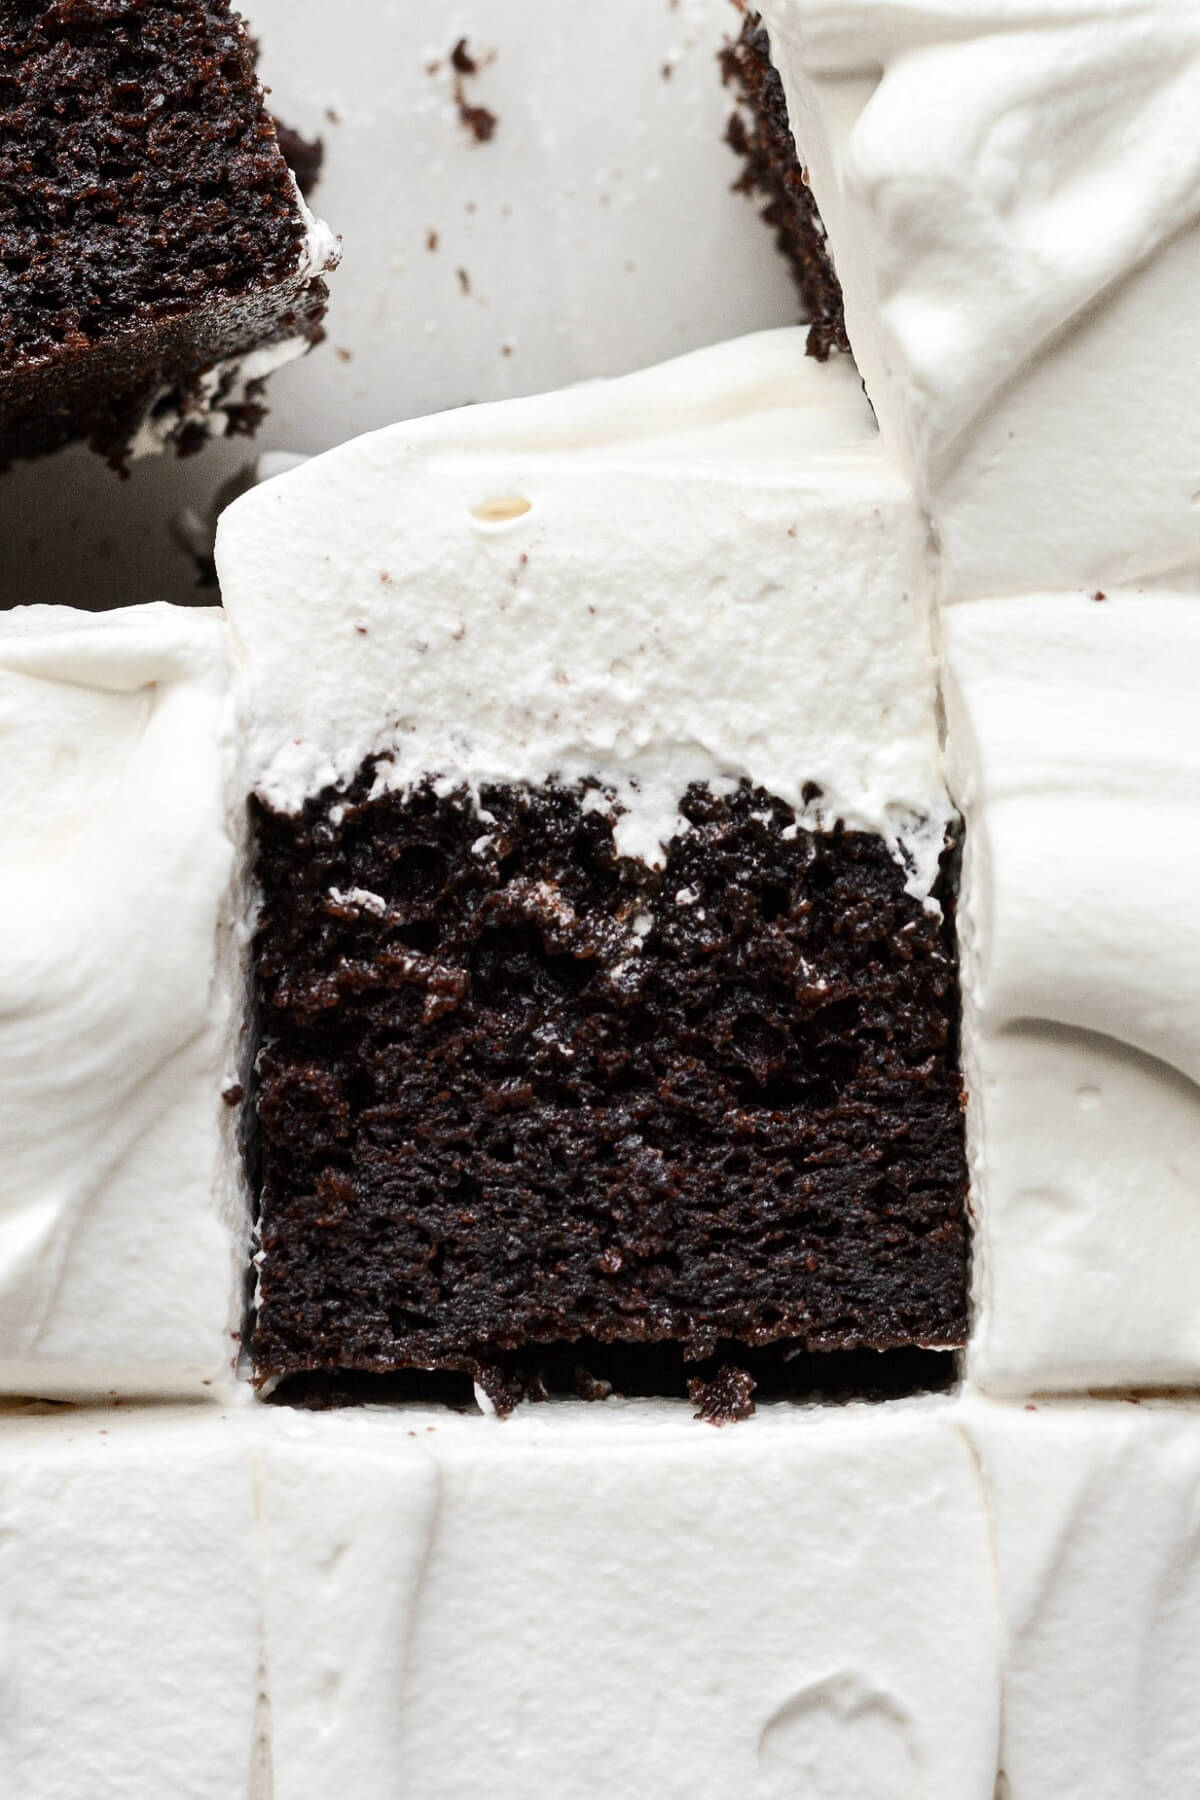 Moist chocolate cake soaked in Kahlua, frosted with whipped cream.